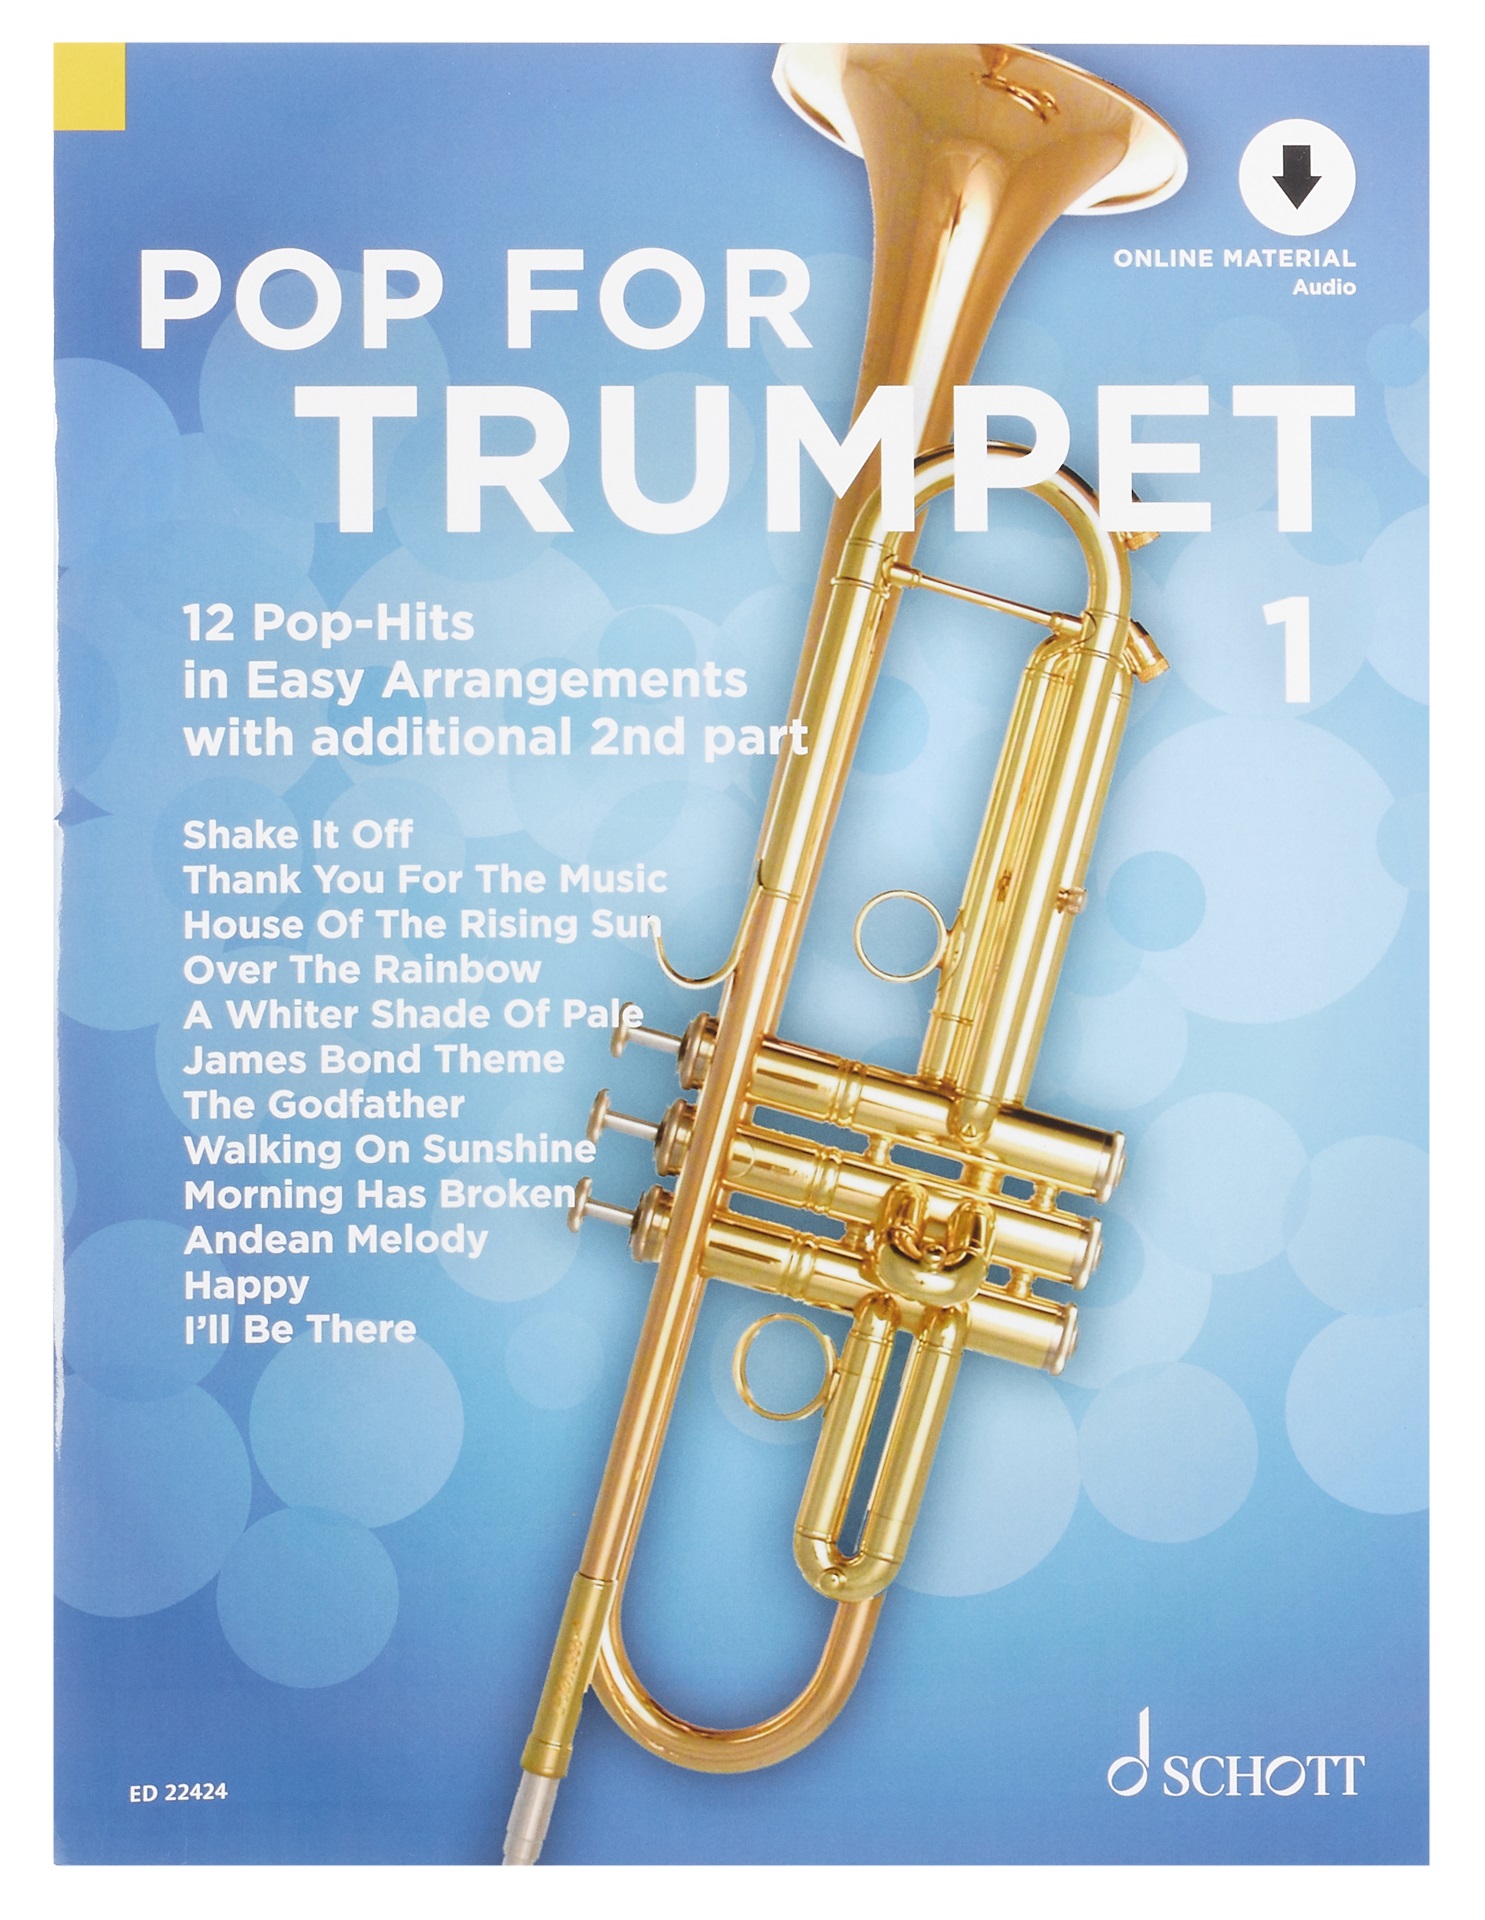 MS Pop for Trumpet Band 1